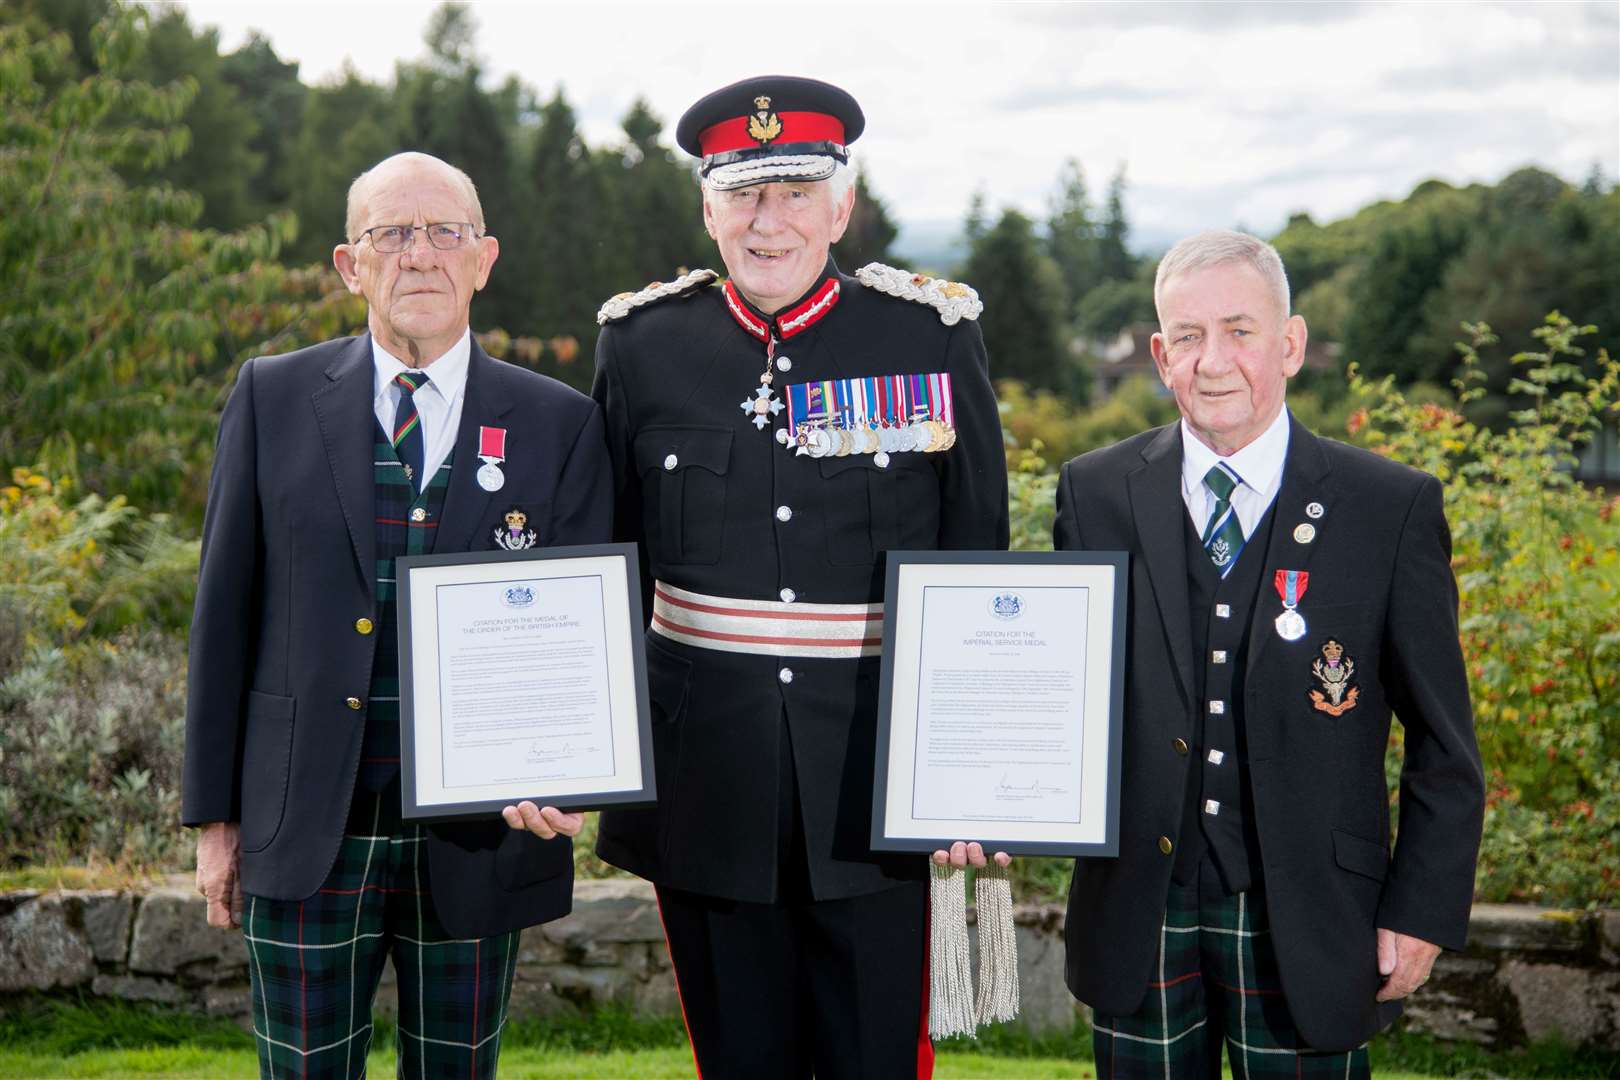 Forres' Albert Duffus (left) is presented with his BEM by Lord Lieutenant of Moray Seymour Monro at Forres Golf Club while Ian 'Chalky' Whyte (right) is presented with the Imperial Service Medal...Picture: Daniel Forsyth..